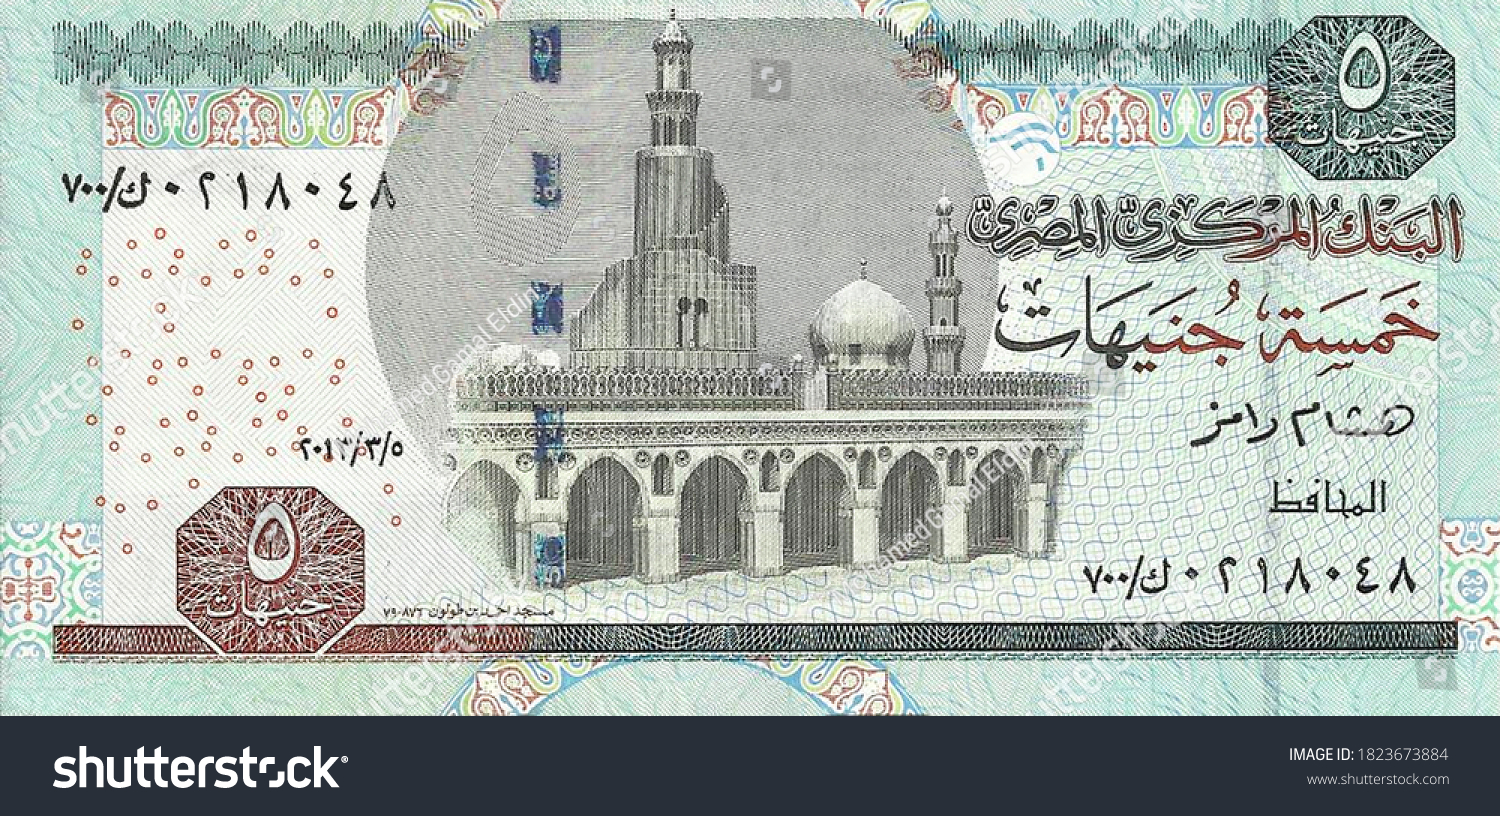 Egyptian 5 Pounds This Money used ONLY on Egypt #1823673884